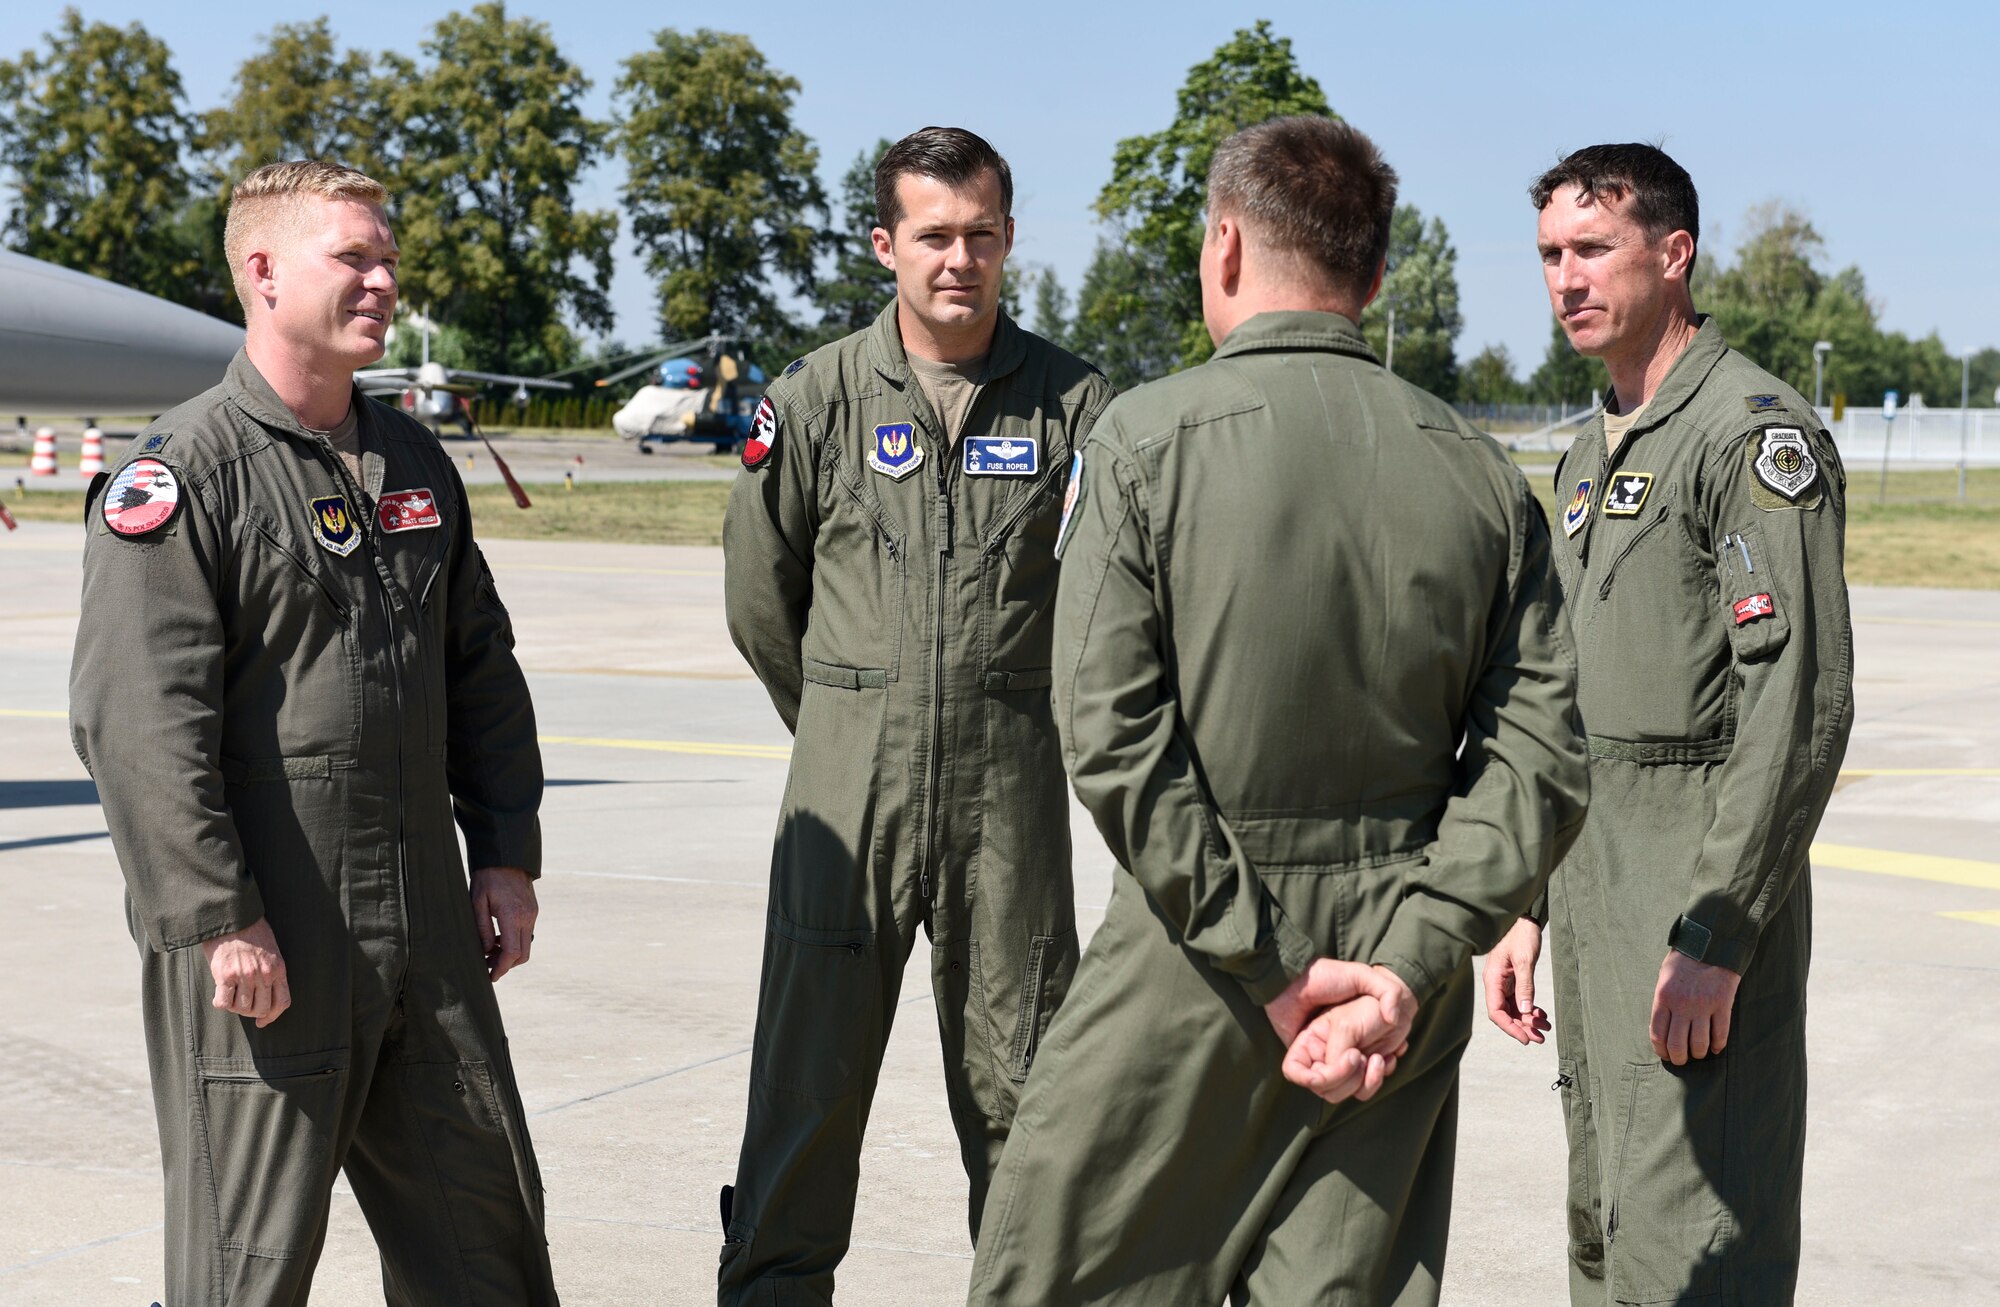 Polish Air Force Col. Tomasz Jatczak, front, 32nd Tactical Air Base commander, Lt. Col. Patrick Kennedy, far left, 480th Expeditionary Fighter Squadron commander, Lt. Col. Albert Roper, center, 52nd Operations Group Detachment One commander, and Col. David Epperson, far right, 52nd Fighter Wing commander, engage in conversation after media day at Łask AB, Poland, August 21, 2020. The United States presence in Poland allows the U.S. to respond to threats and support global operations and strengthens the NATO alliance overall. (U.S. Air Force photo by Senior Airman Melody W. Howley)